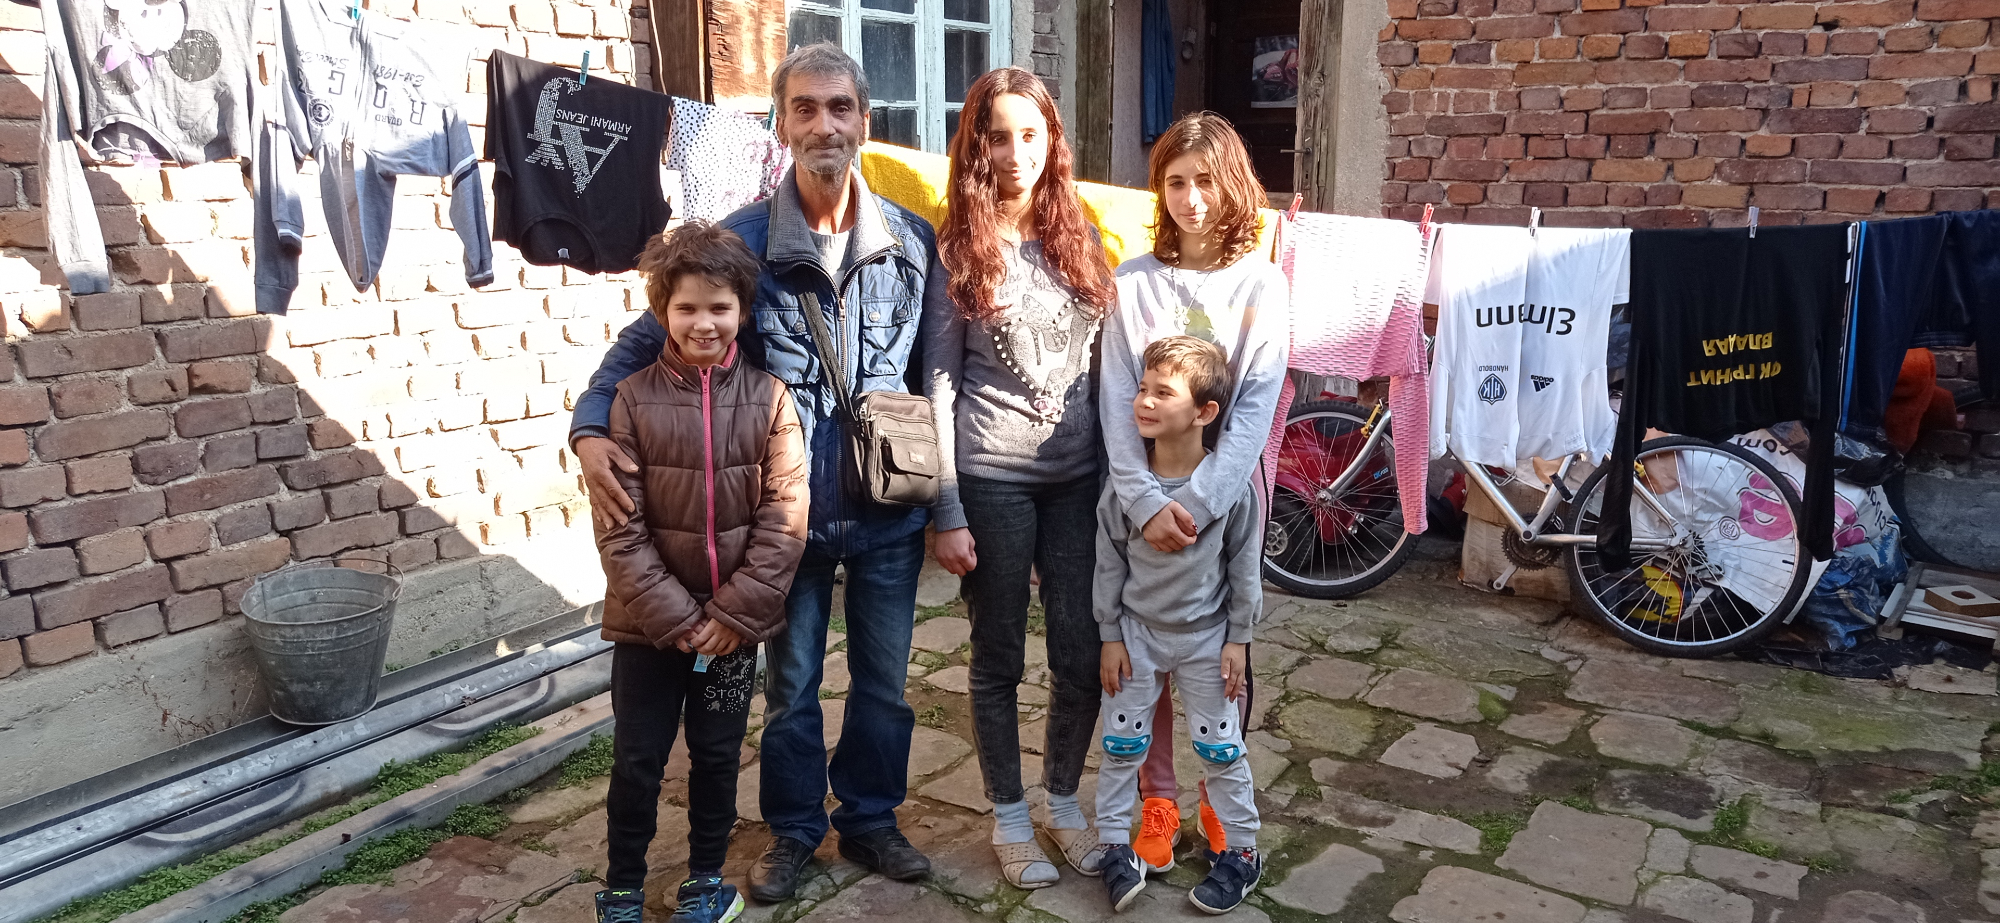 Krasimir was able to reunite with his children with the support he received through MWB's Street Mercy Program